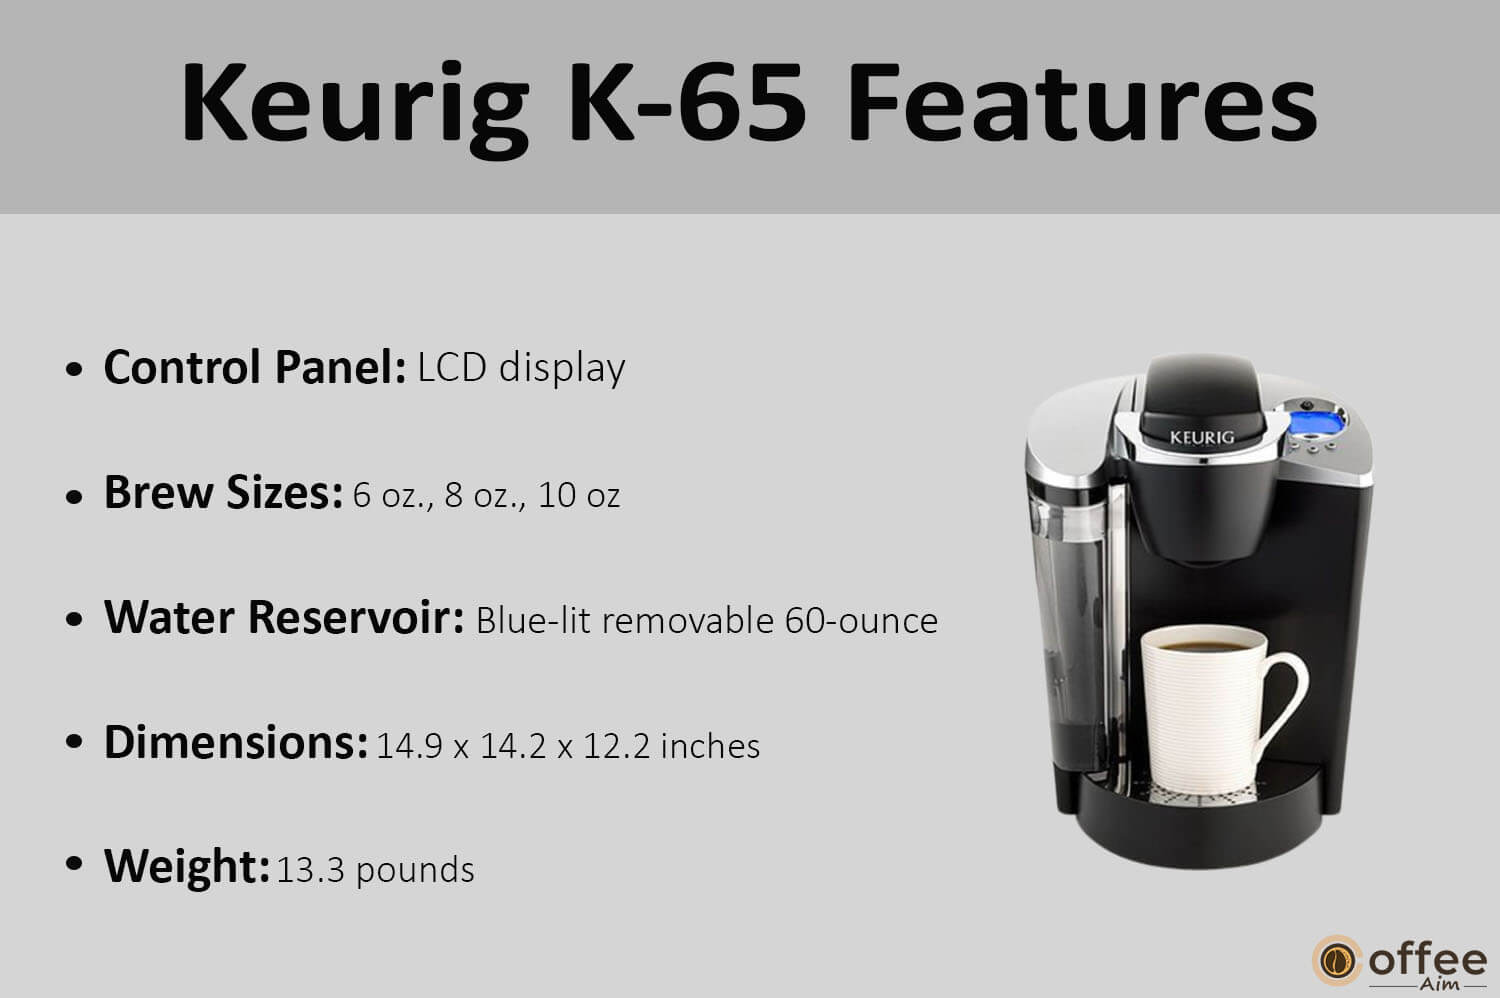 "The image provides a detailed overview of the features of the Keurig K-65 machine, complementing our comprehensive article on the Keurig K-65 review."